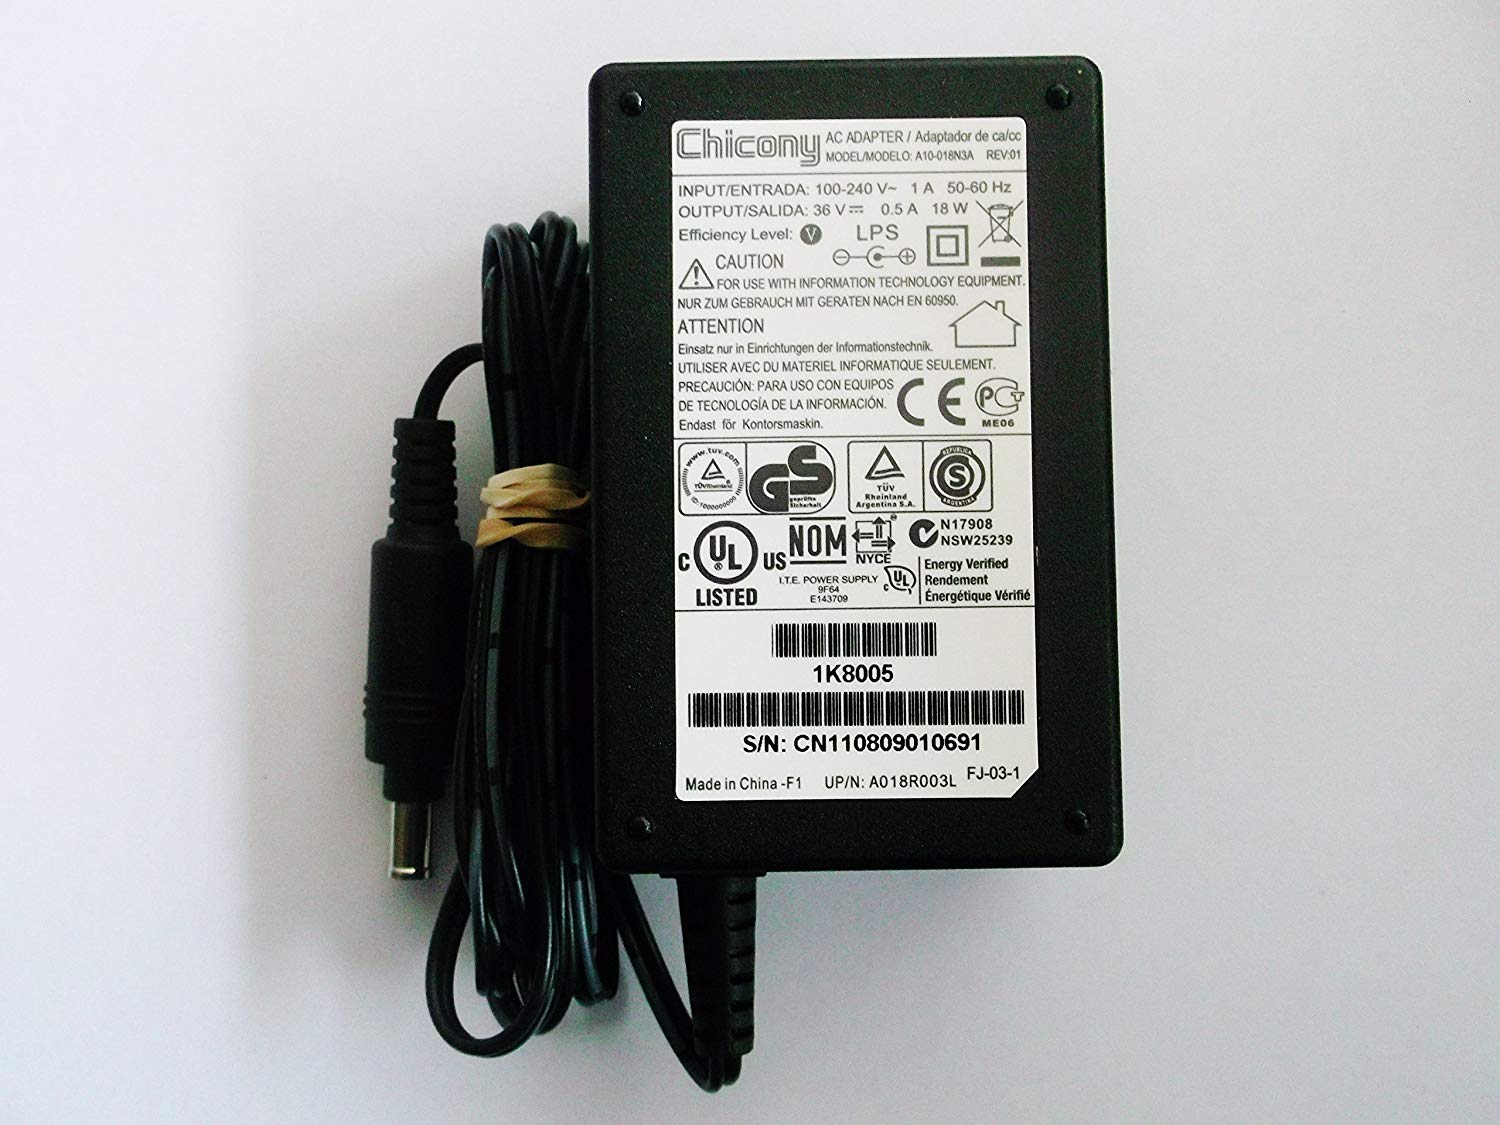 New CHICONY A10-018N3A 36V 0.5A 18W POWER SUPPLY AC ADAPTER